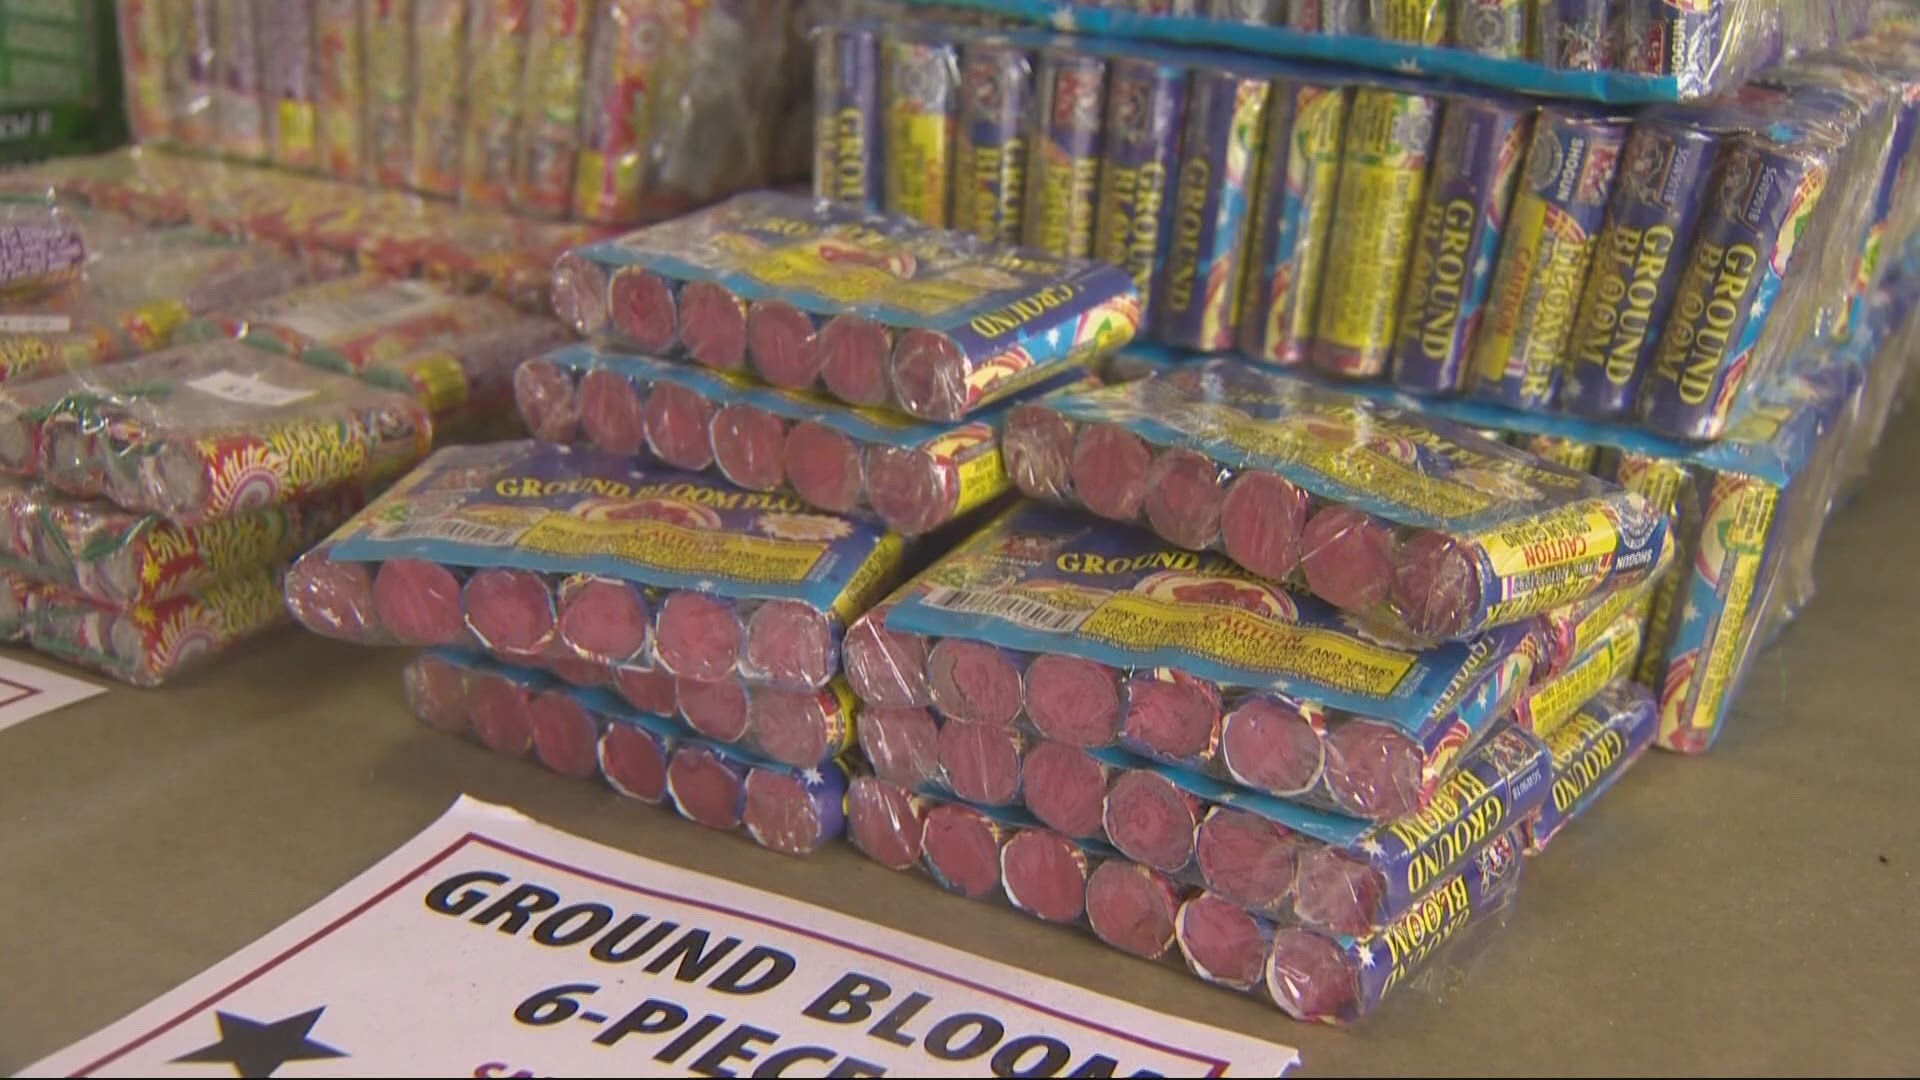 Fireworks caused a deadly apartment fire in NE Portland on July 4. KGW spoke to city officials about their thoughts on prohibiting fireworks year-round.